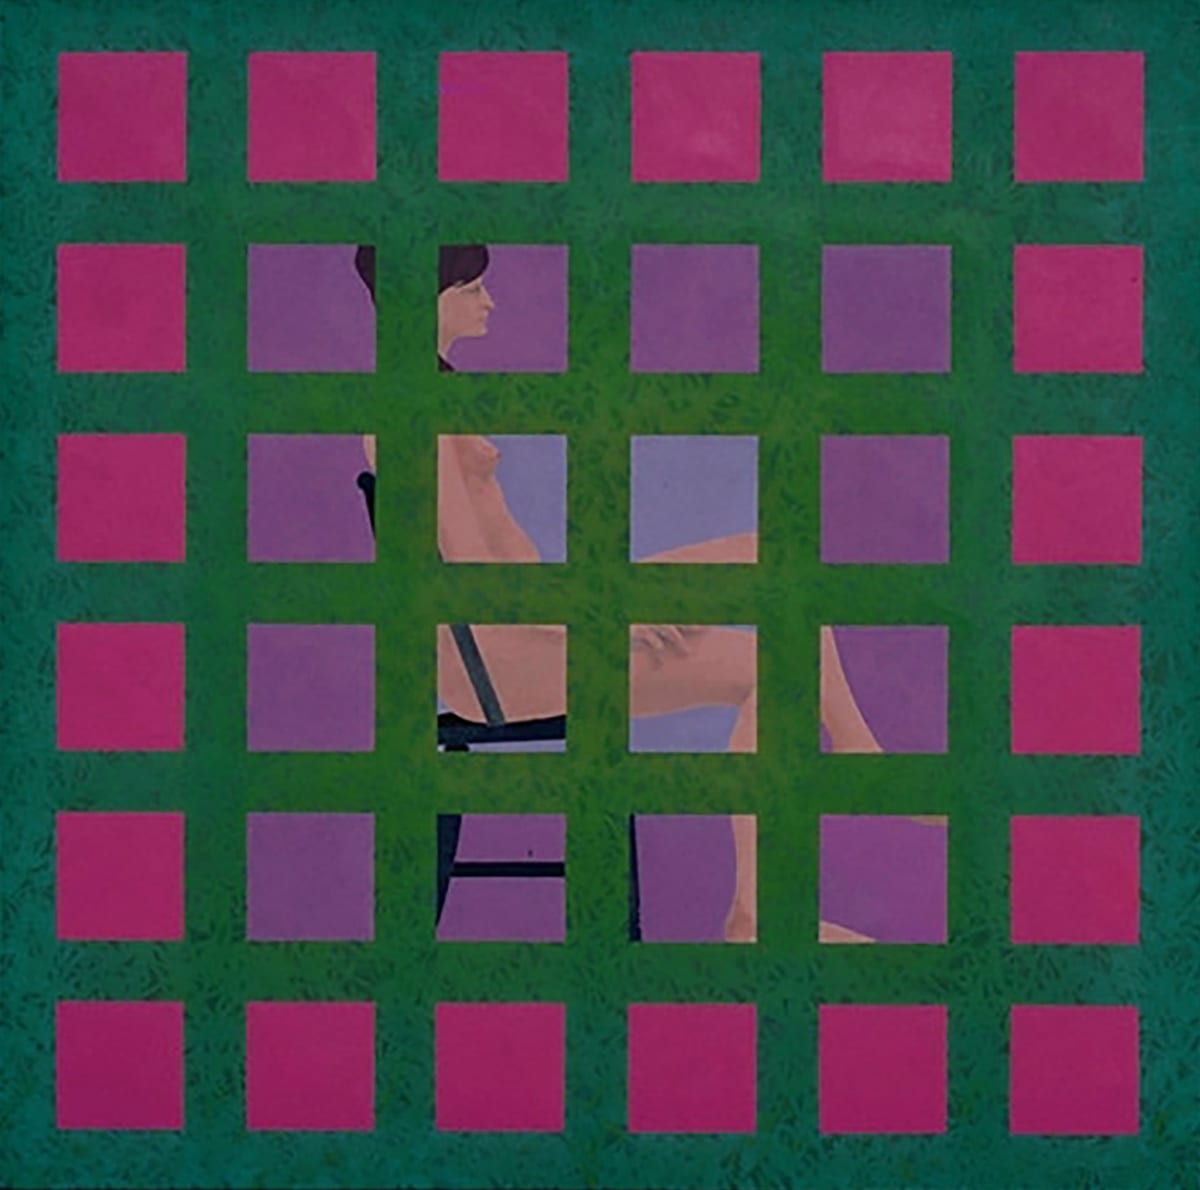 Nude w/ Grid  Image: Red shifting to violet, green slightly more saturated in center. All colors would  change in the slides. Kodachrome or Ecktachrome? Or Agfa Chrome?...plus trying to a correct color balance.